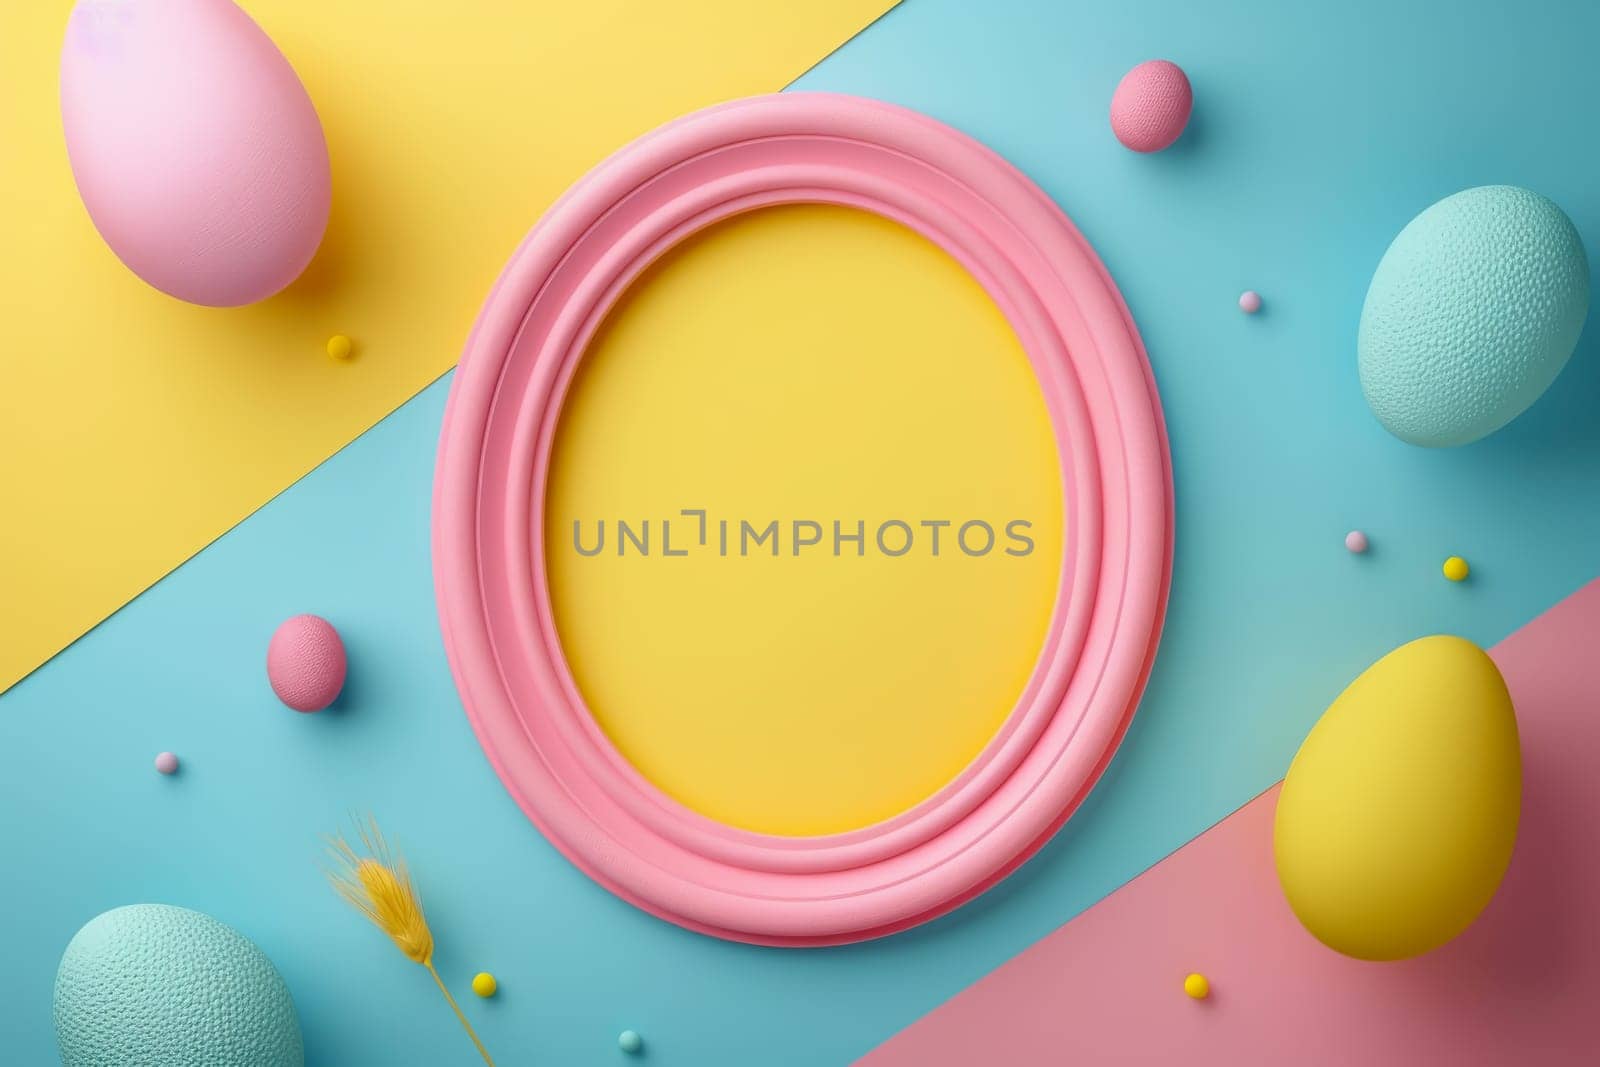 Easter eggs festival, pastel background colors charming, adorable, shiny,3D illustration concepts. by Manastrong